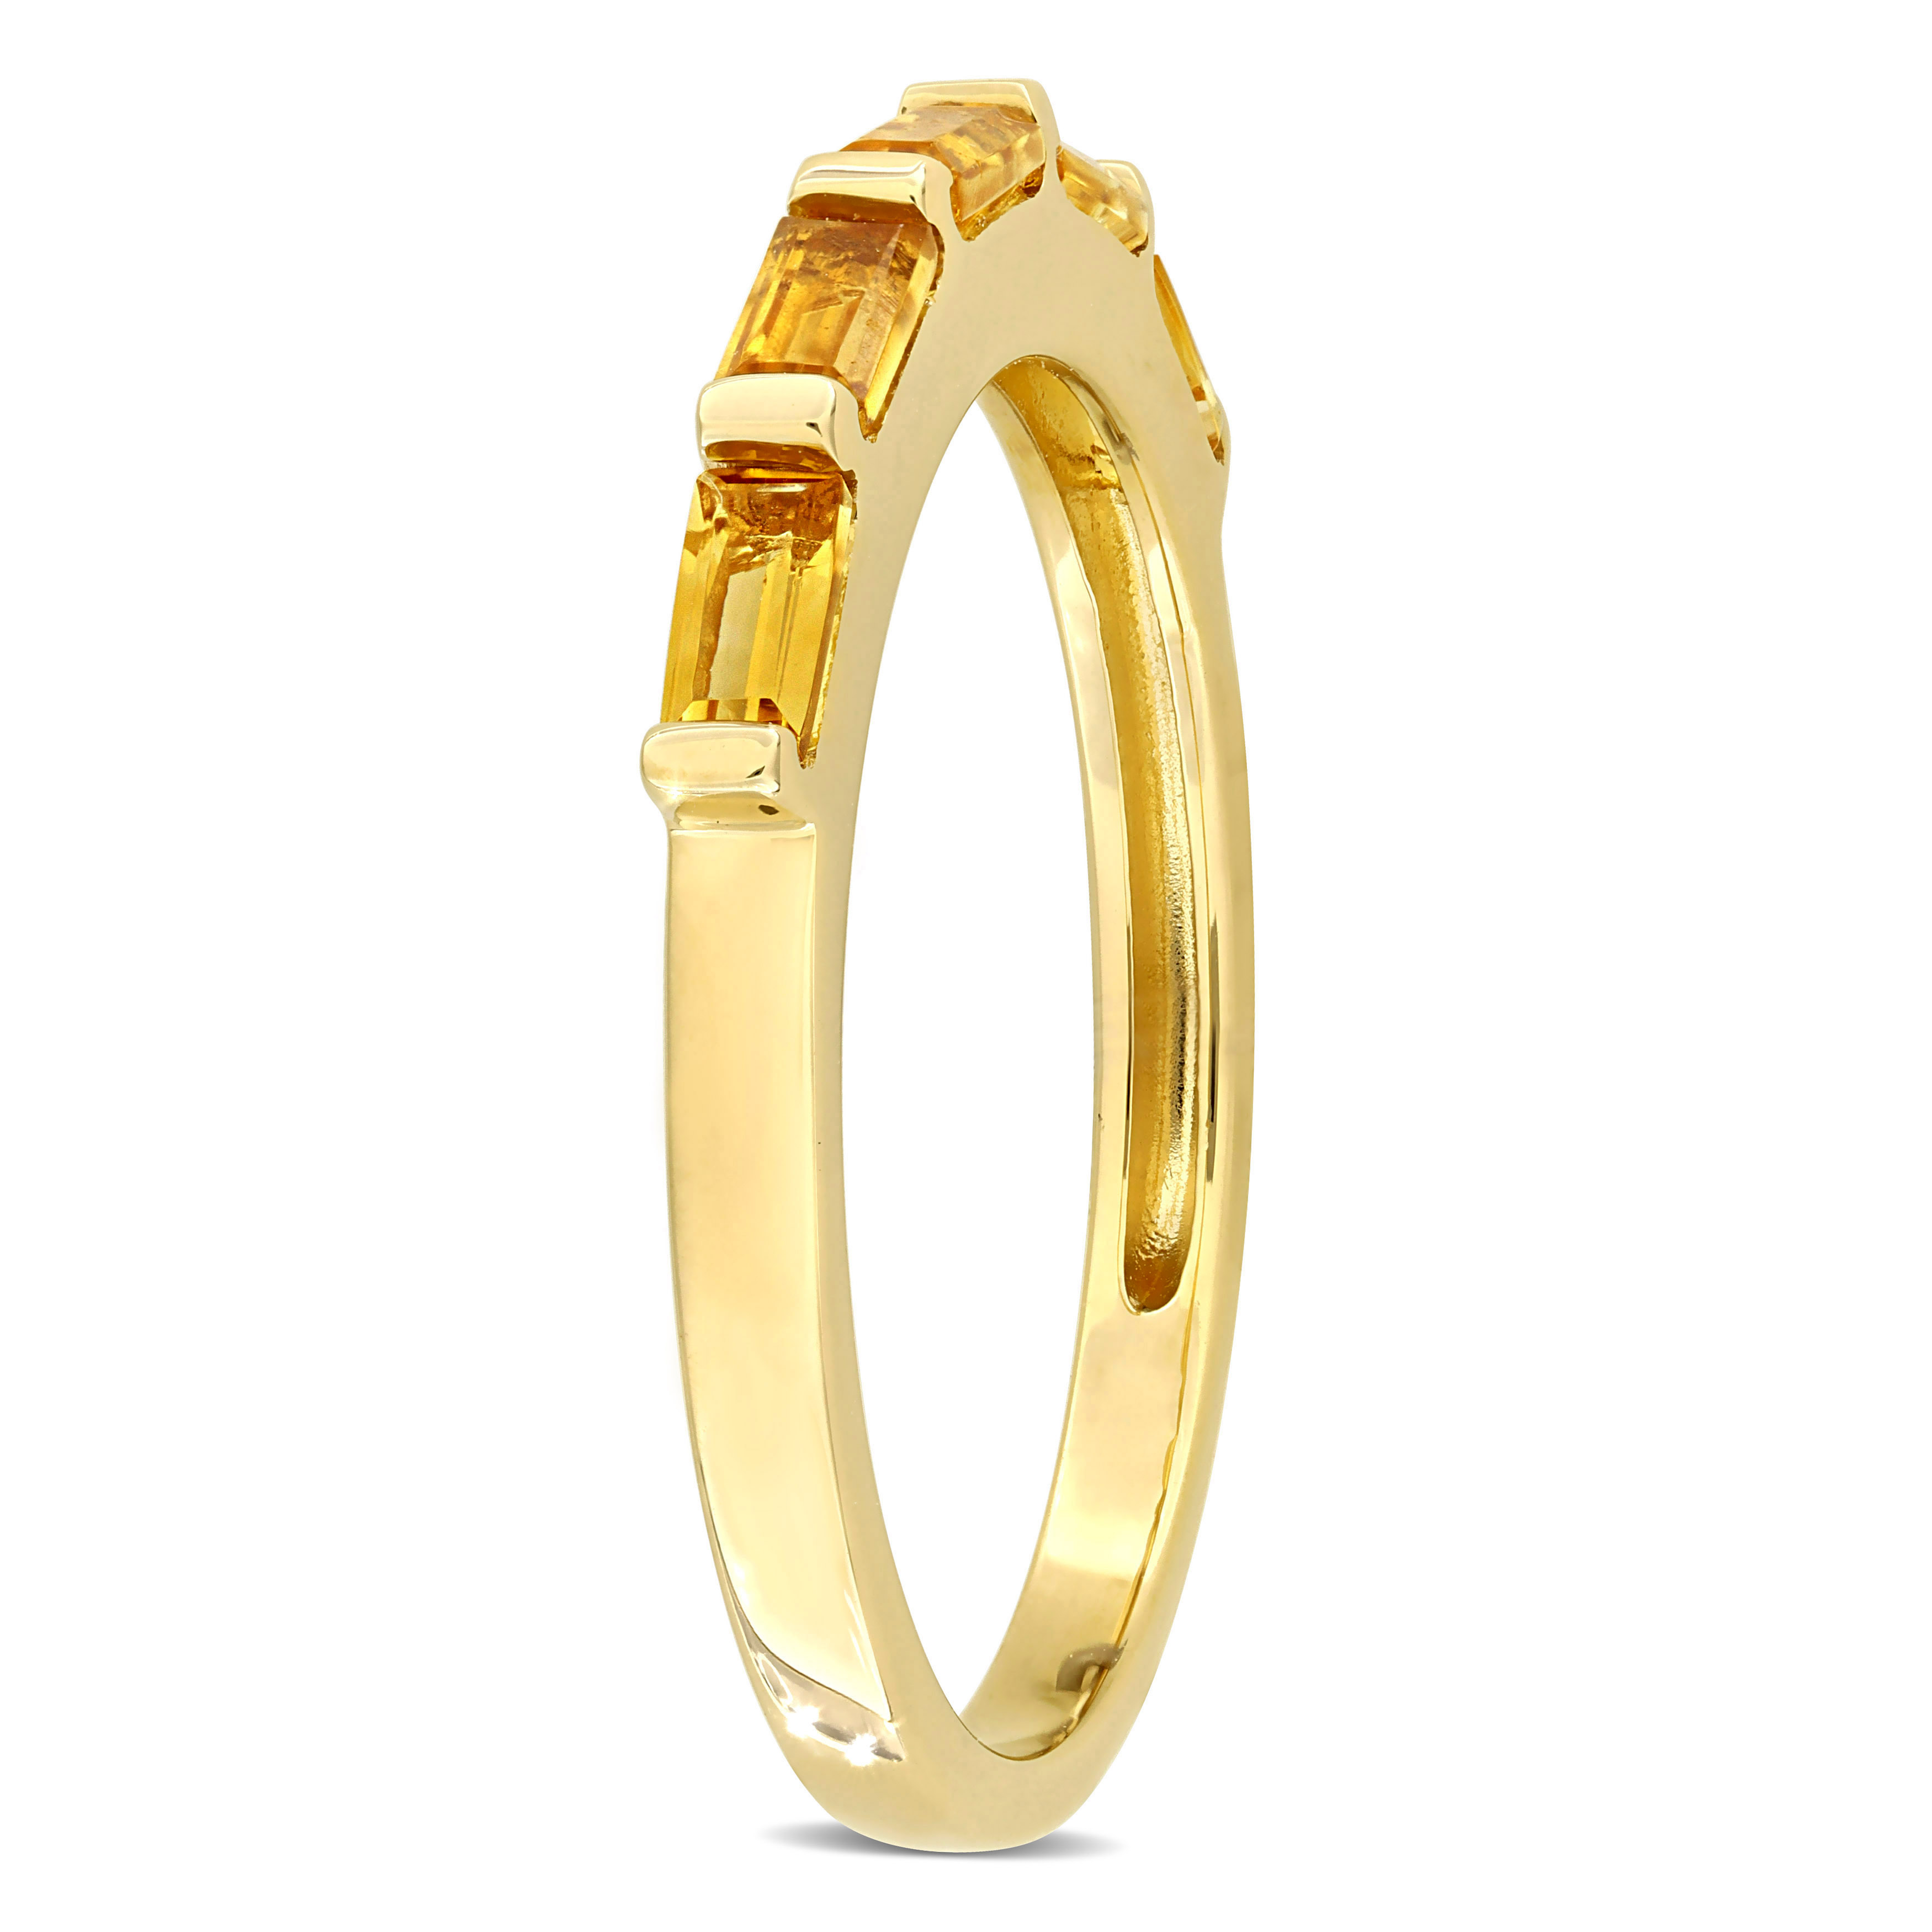 5/8 CT TGW Baguette-Cut Citrine Anniversary Band Ring in 10k Yellow Gold